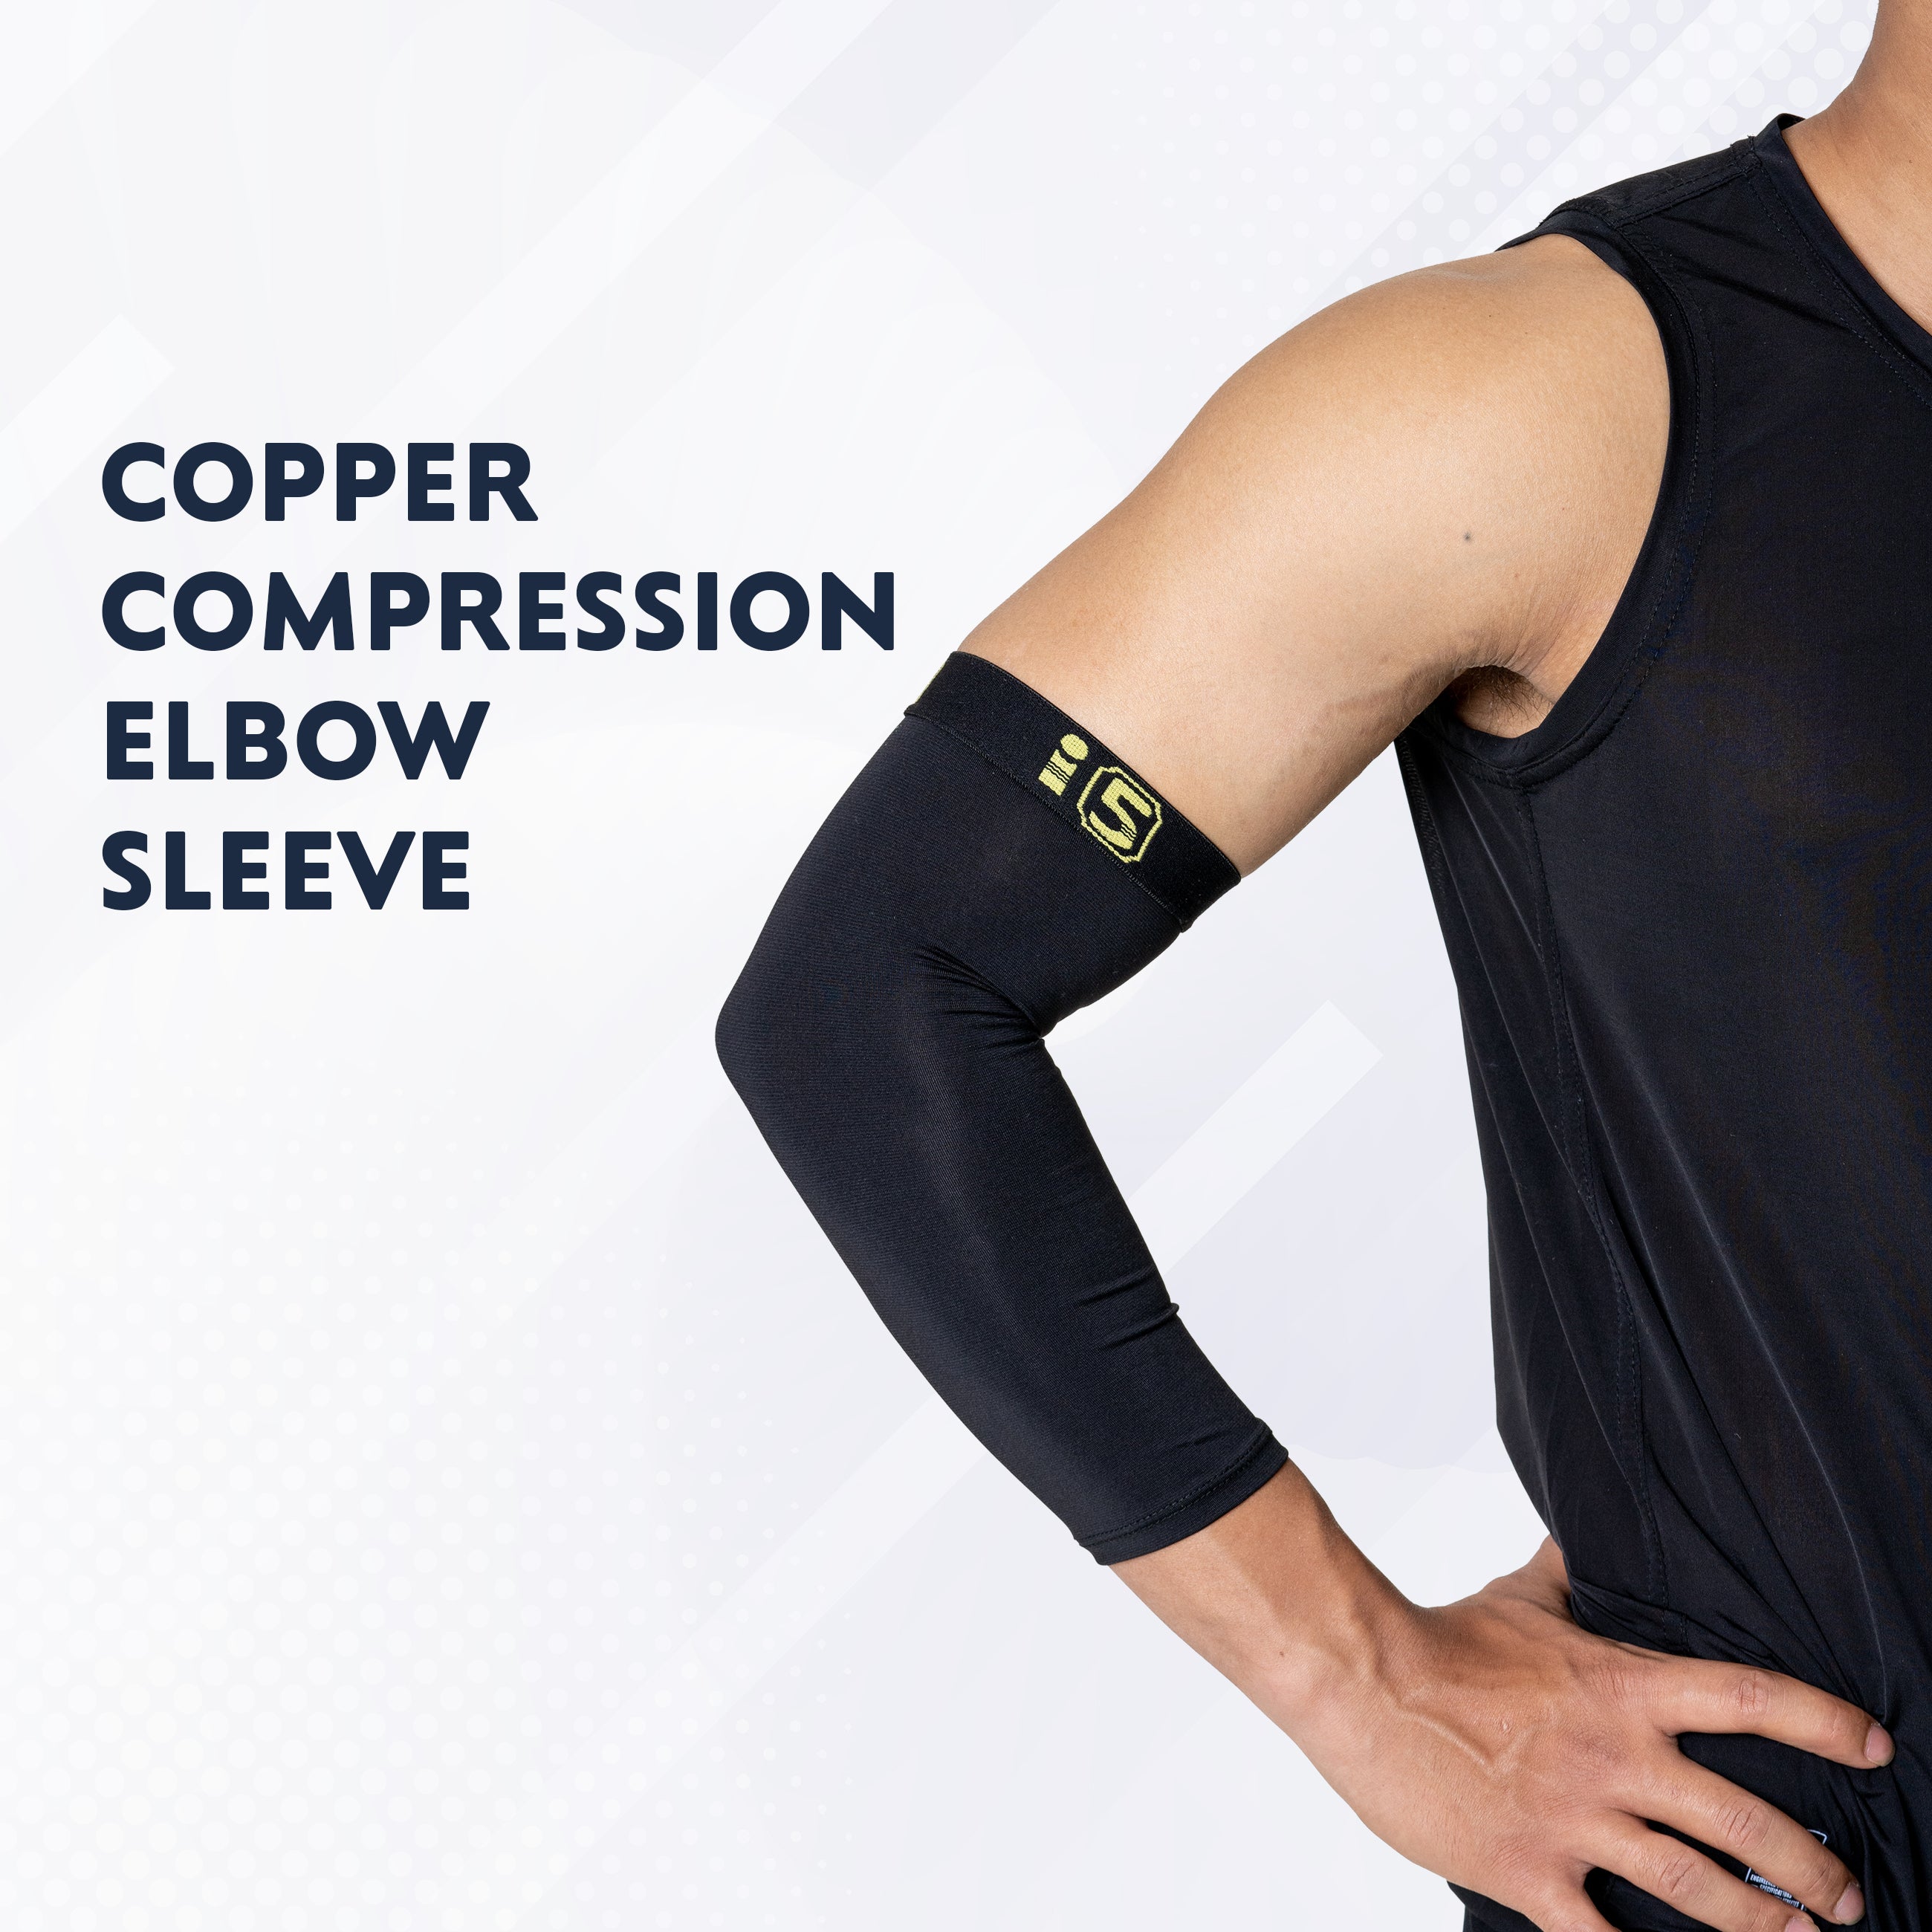 I5Joints-Cooper Compression Elbow Support(I5Joints Elbow Compression Cap For Men & Women|Workout, Gym, Pain Relief, Quick Recovery, Tennis, Golf, Gym Fitness, Volleyball, Cricket| Prevent Injuries|Single Pair))